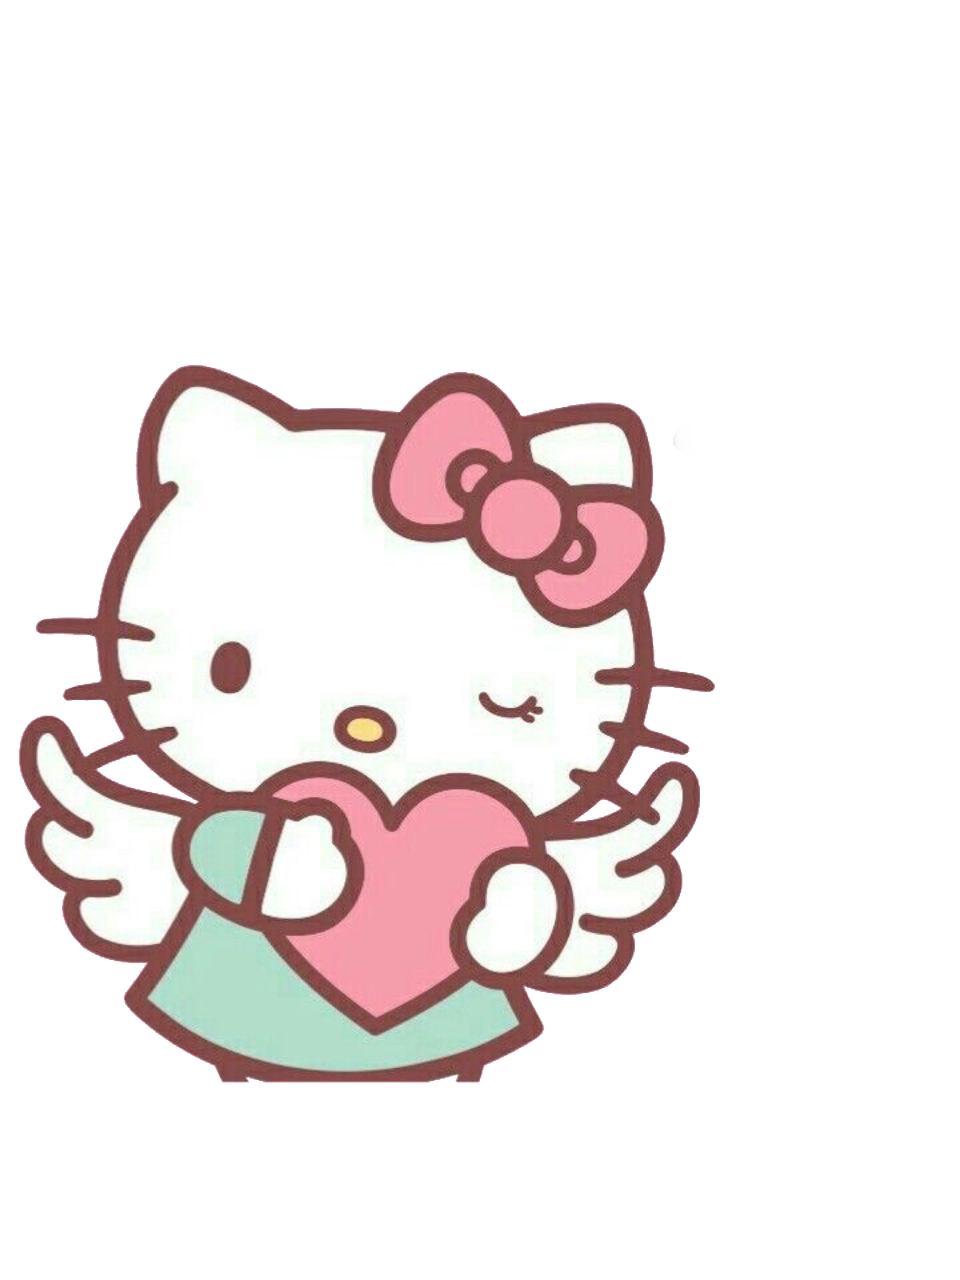 Hello Kitty Paint With Water Image Sticker Activity Book Amazon Com Pngdownloadforpicsart Transparency And Transluc Png Download 960 1280 Free Transparent Hello Kitty Png Download Clip Art Library